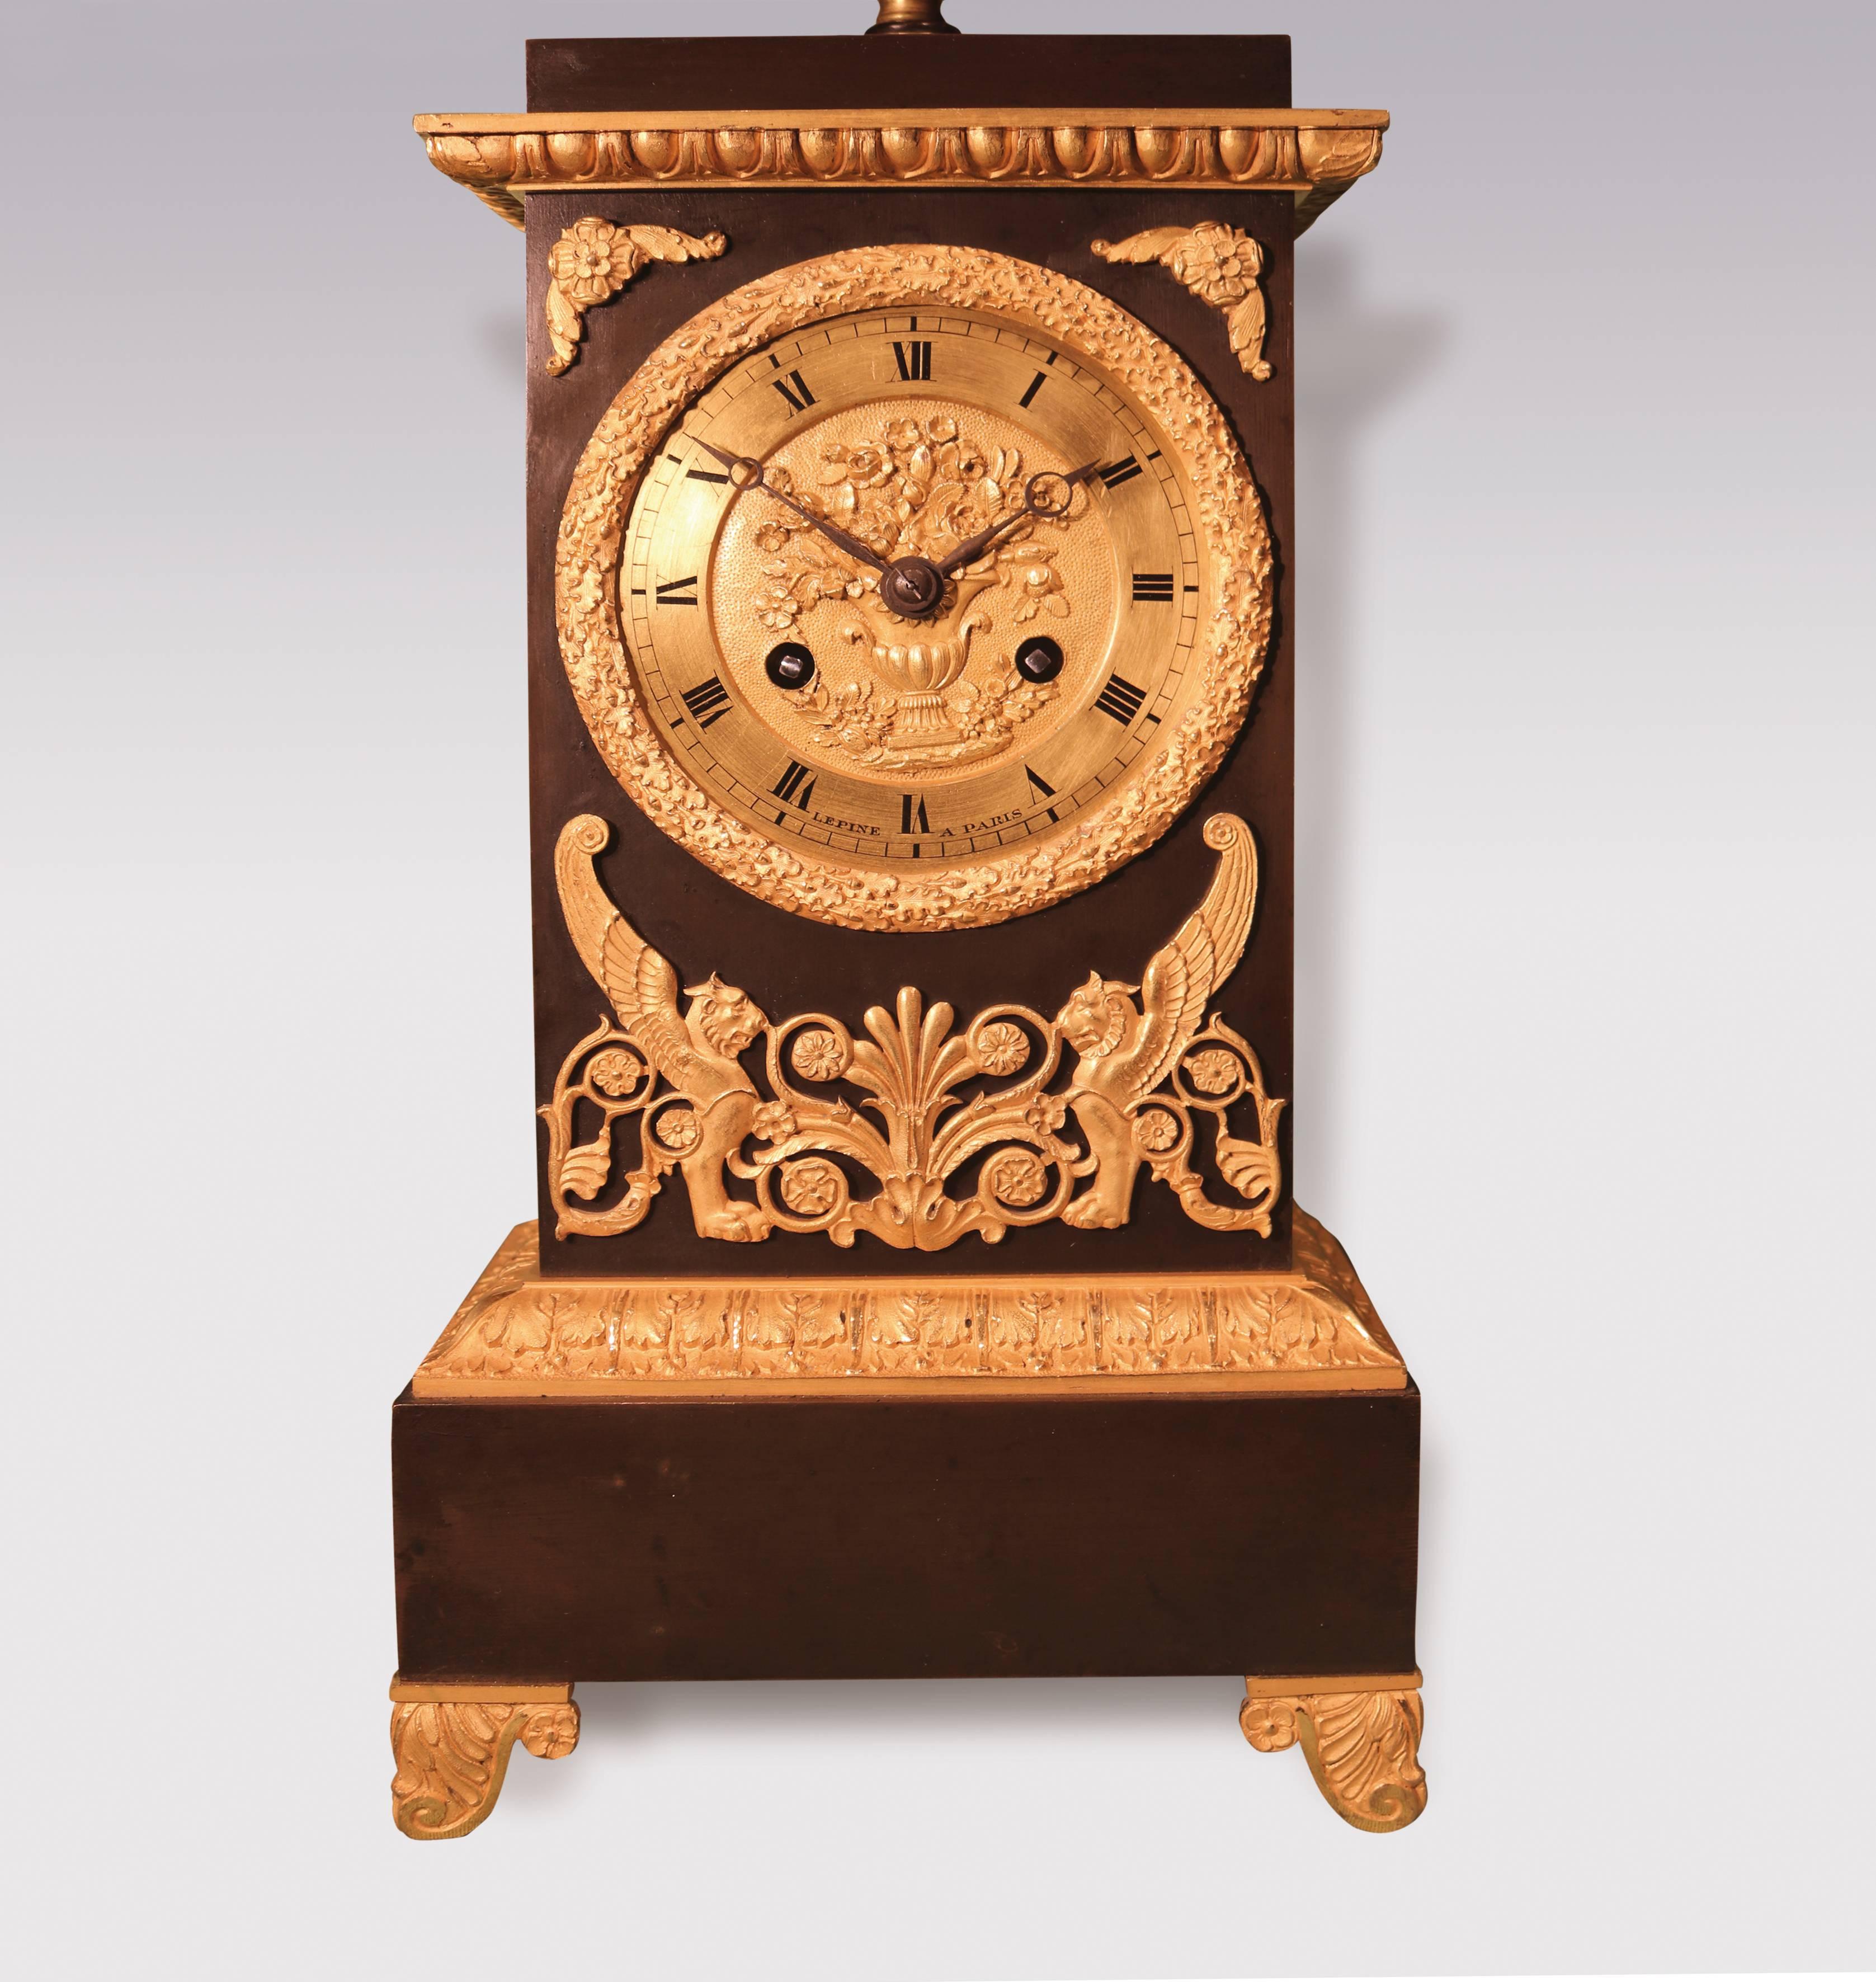 An early 19th century well-cast bronze and ormolu French clock, with 8-day striking movement by Lepine a Paris, having fine quality ormolu mounts to the case, surmounted by urn with scrolled carrying handles.

Further Information:

Jean-Antoine